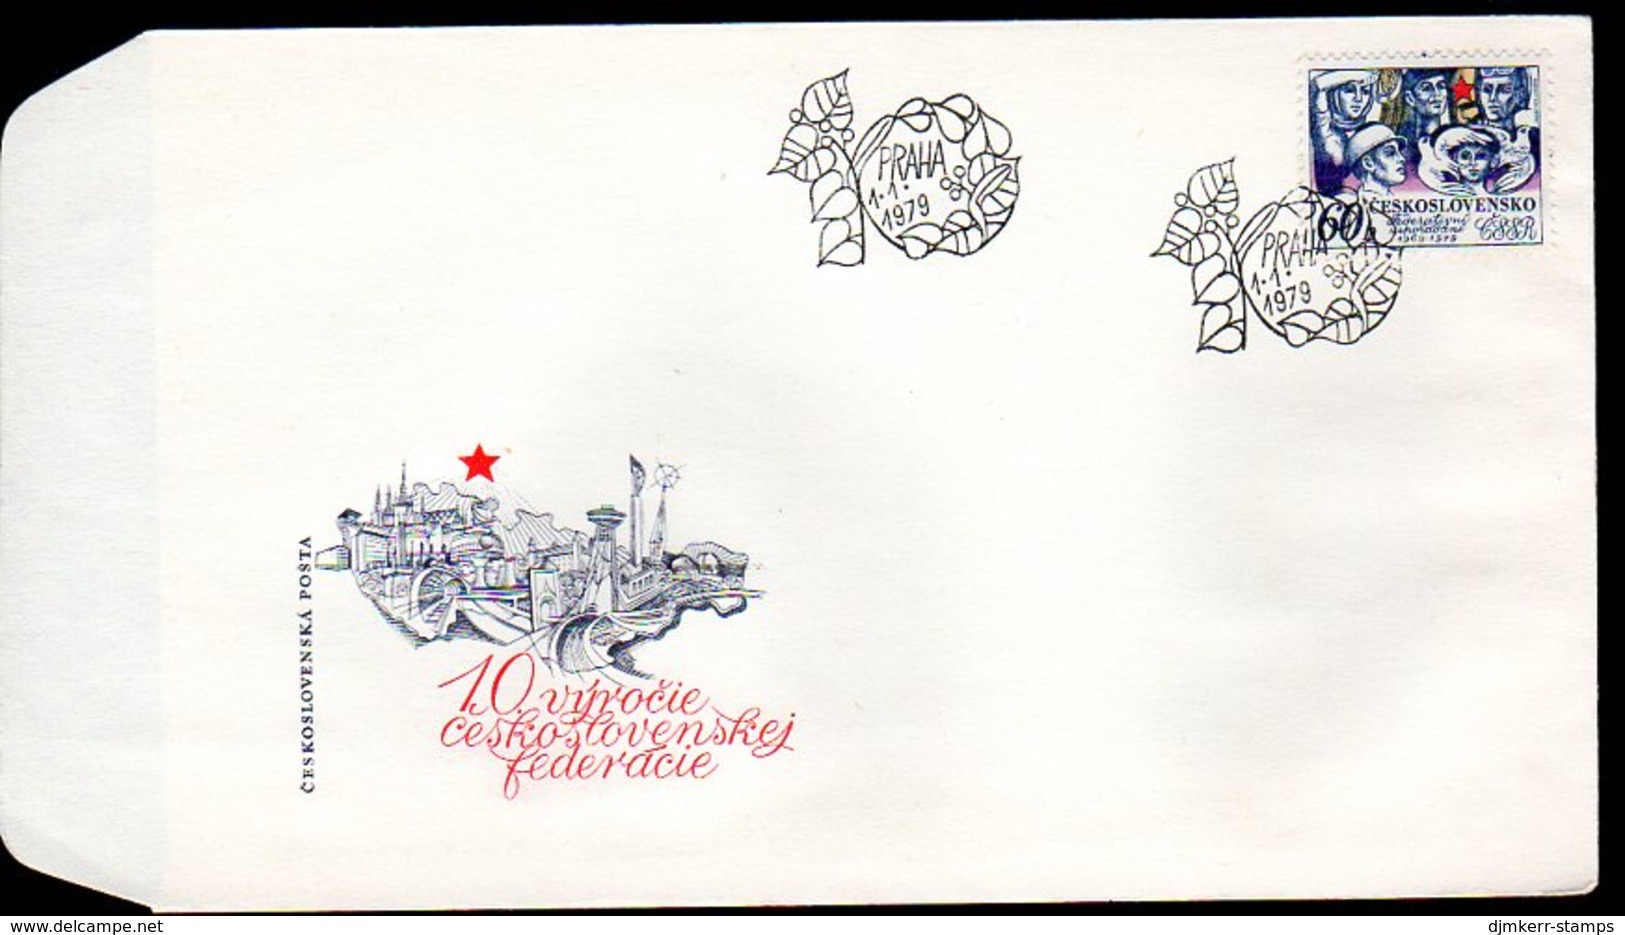 CZECHOSLOVAKIA 1979 Federal Constitution FDC.  Michel 2486 - FDC